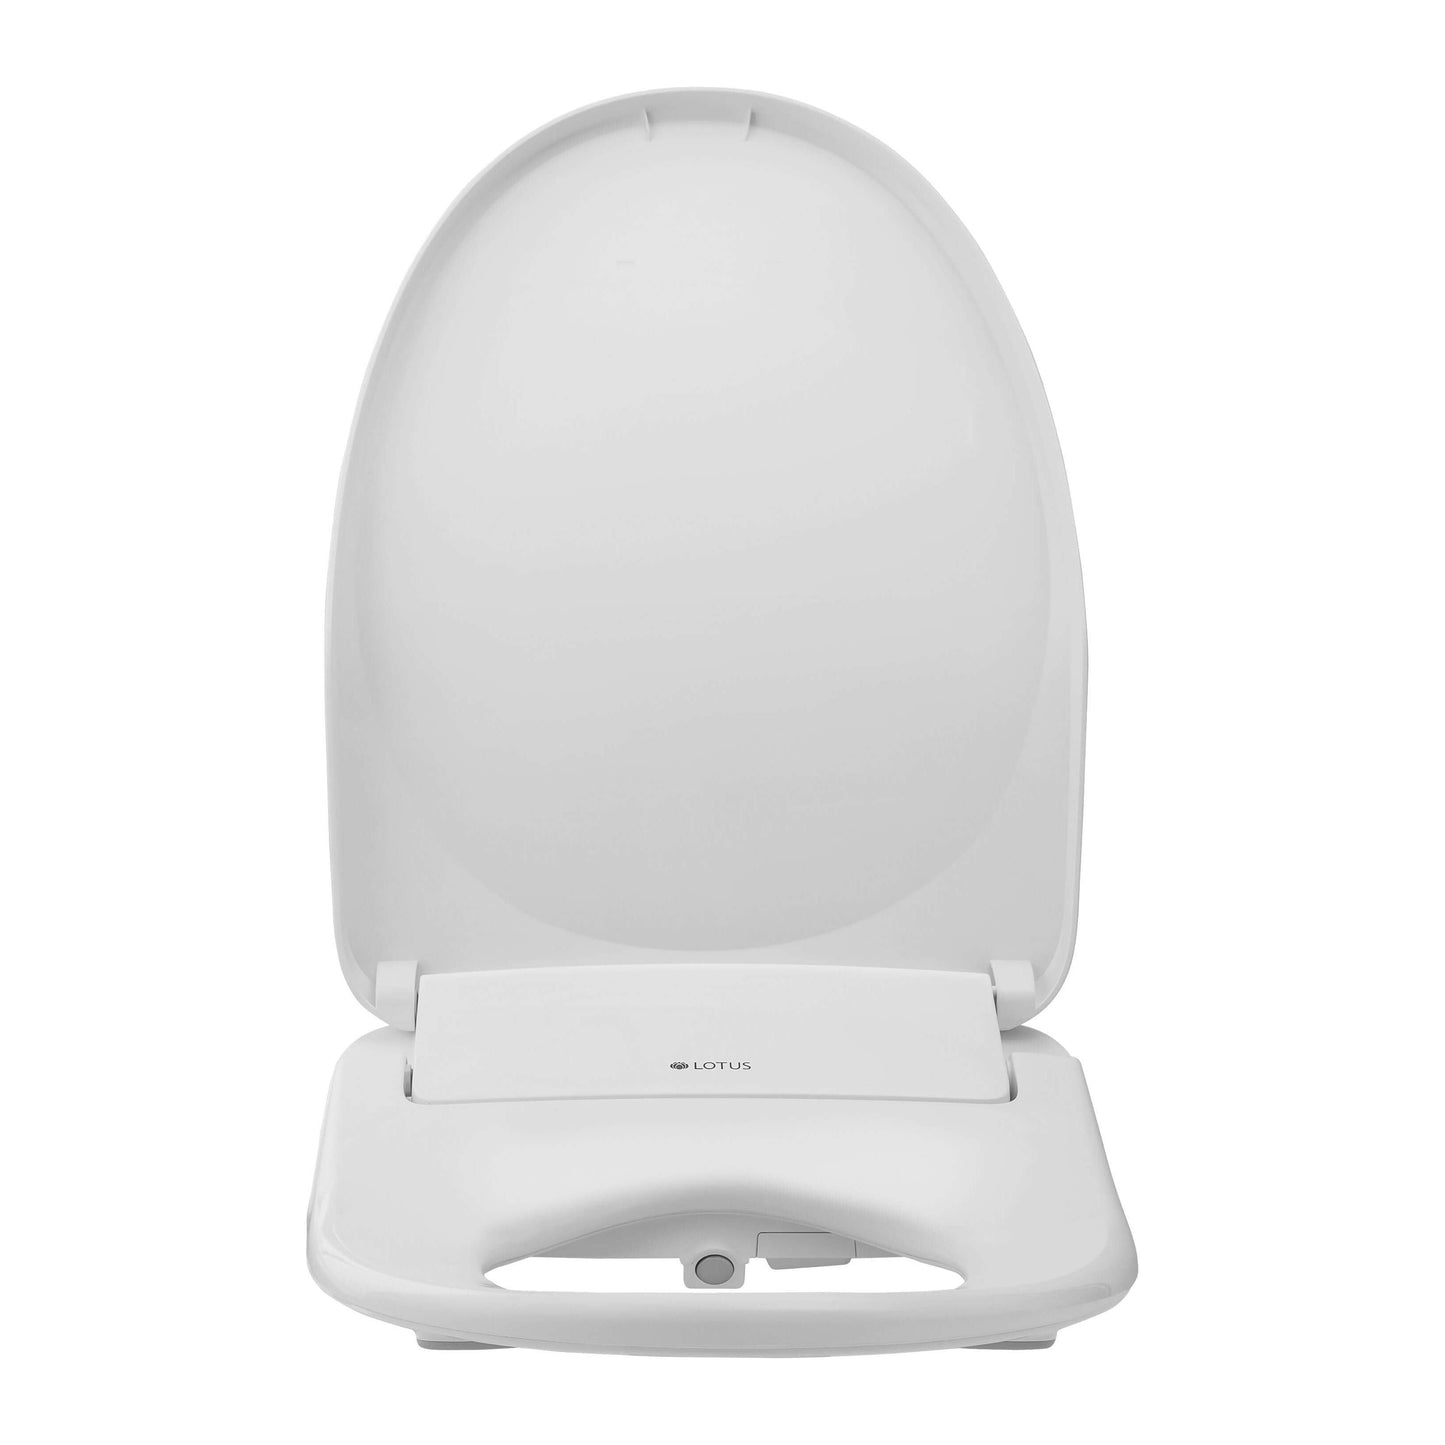 Lotus Bidet Seat ATS-850R - front view with lid open